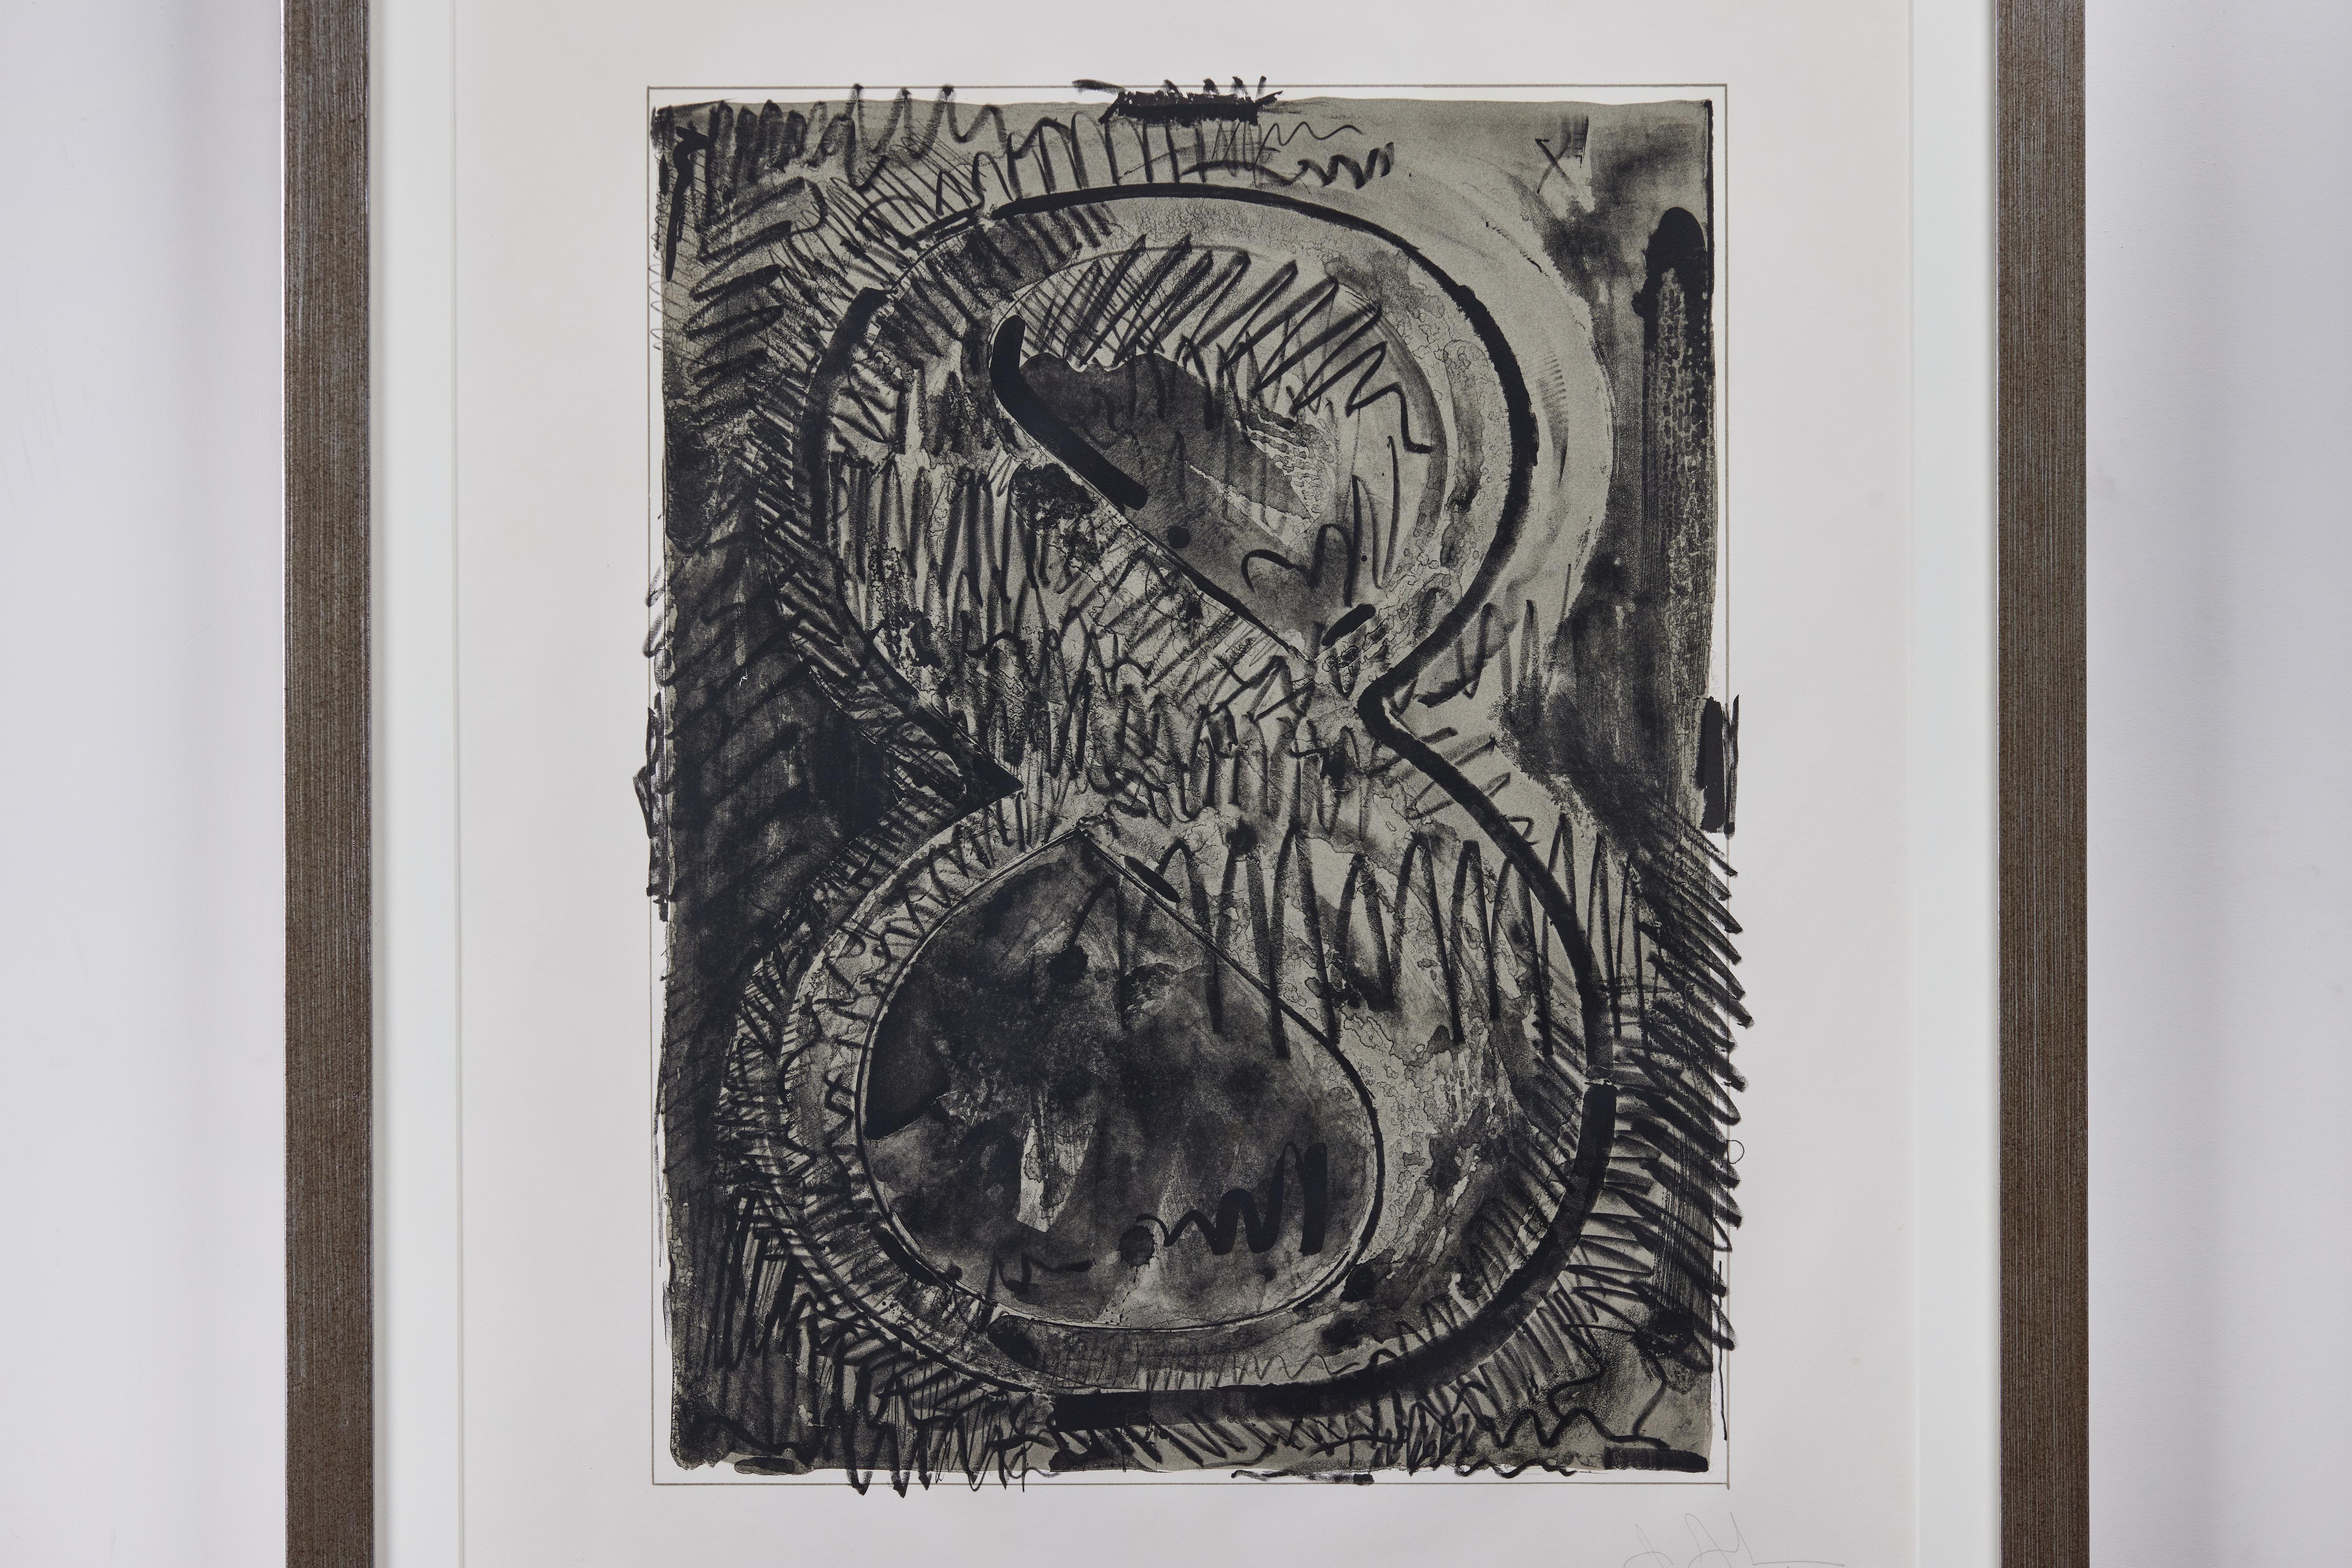 Jasper Johns (American b. 1930) Figure 8 (ULAE 52) From Black Numeral Series
Signed, dated, numbered 66/70, 1968 lithograph.

Select public collections: MOMA, NYC;
National Gallery of Art, D.C.; Art Institute of Chicago, IL; Tate Gallery,